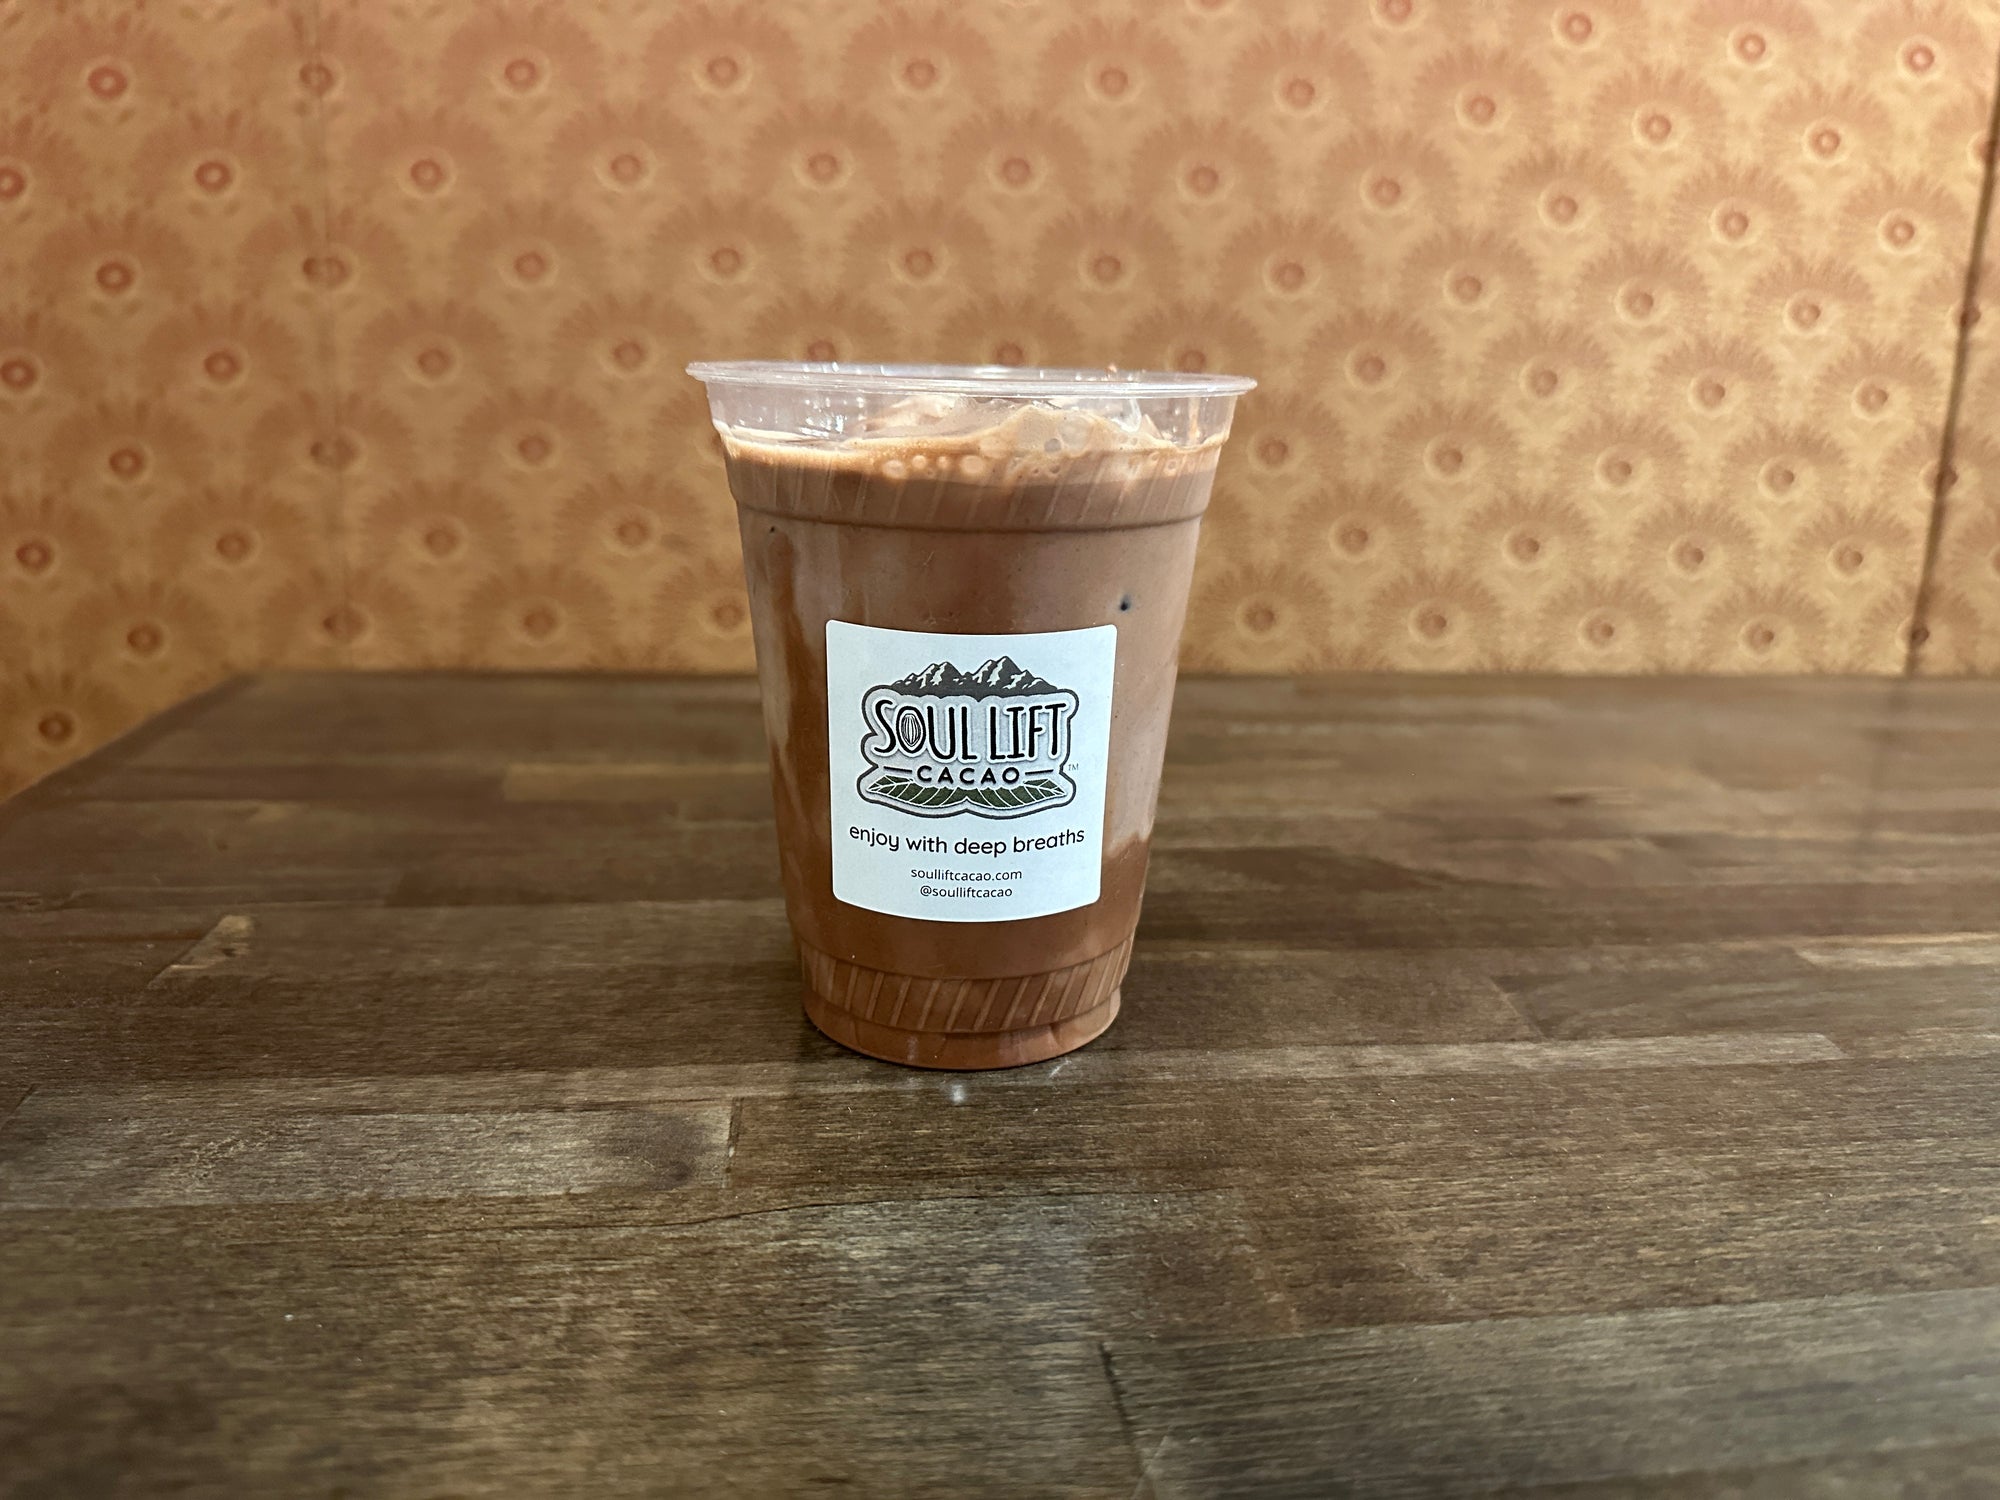 How to Make an Iced Cacao Drink